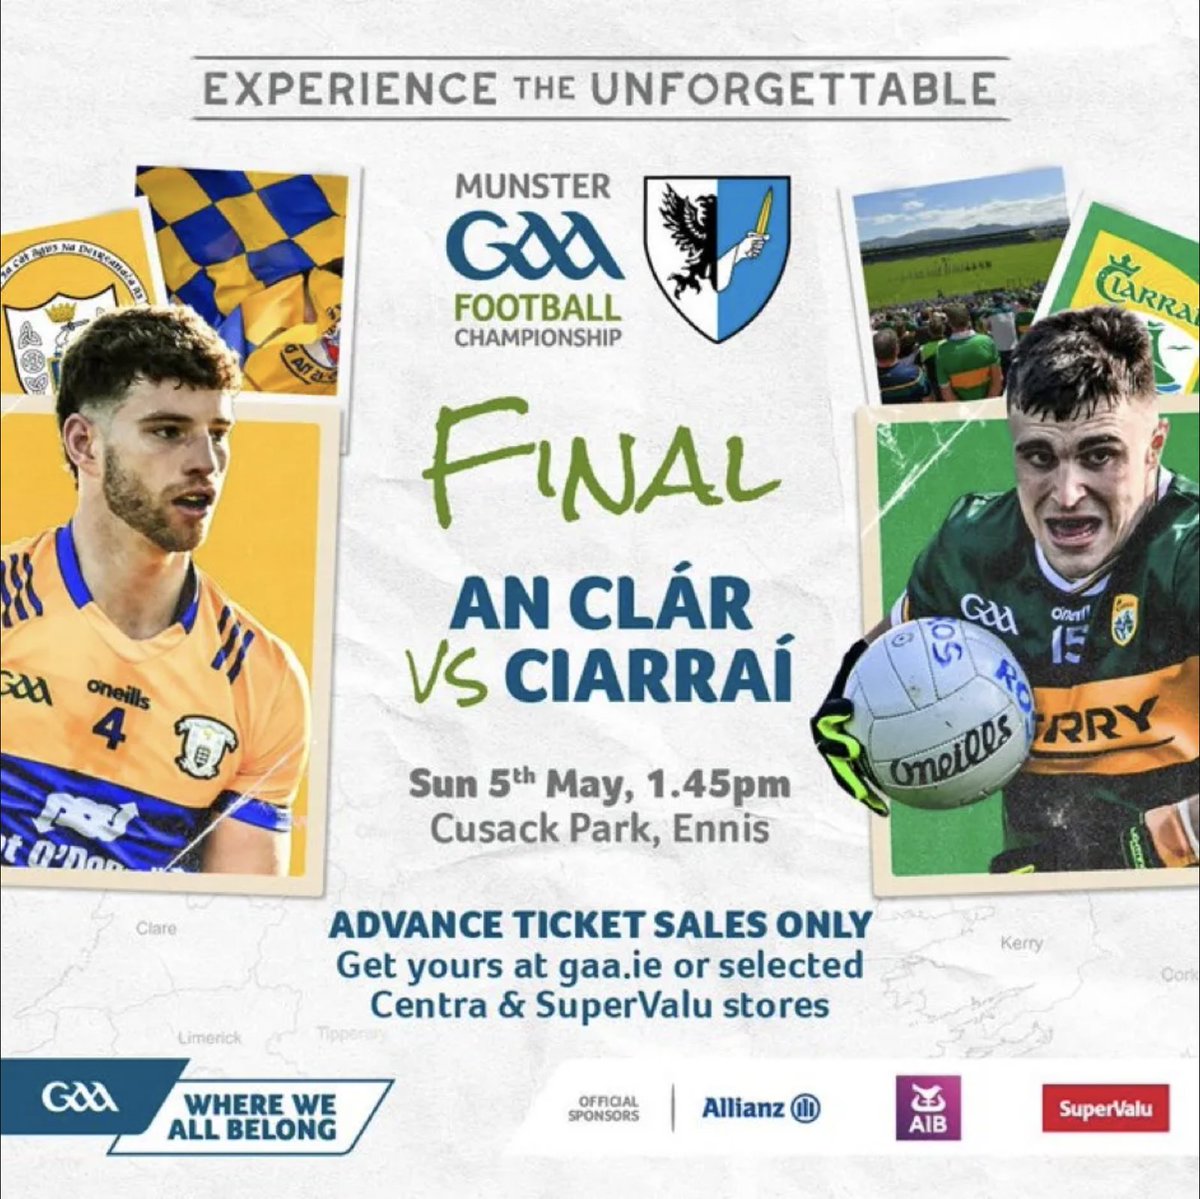 From everyone here at Pat O’Donnell & Co., we wish the Senior Clare Footballers the best of luck in their clash against Kerry in today’s Munster GAA Football Championship Final!

#upthebanner💛💙

#claregaa #gaelicfootball #gaa #gaaclub #ireland #clare #supportlocal #kerry